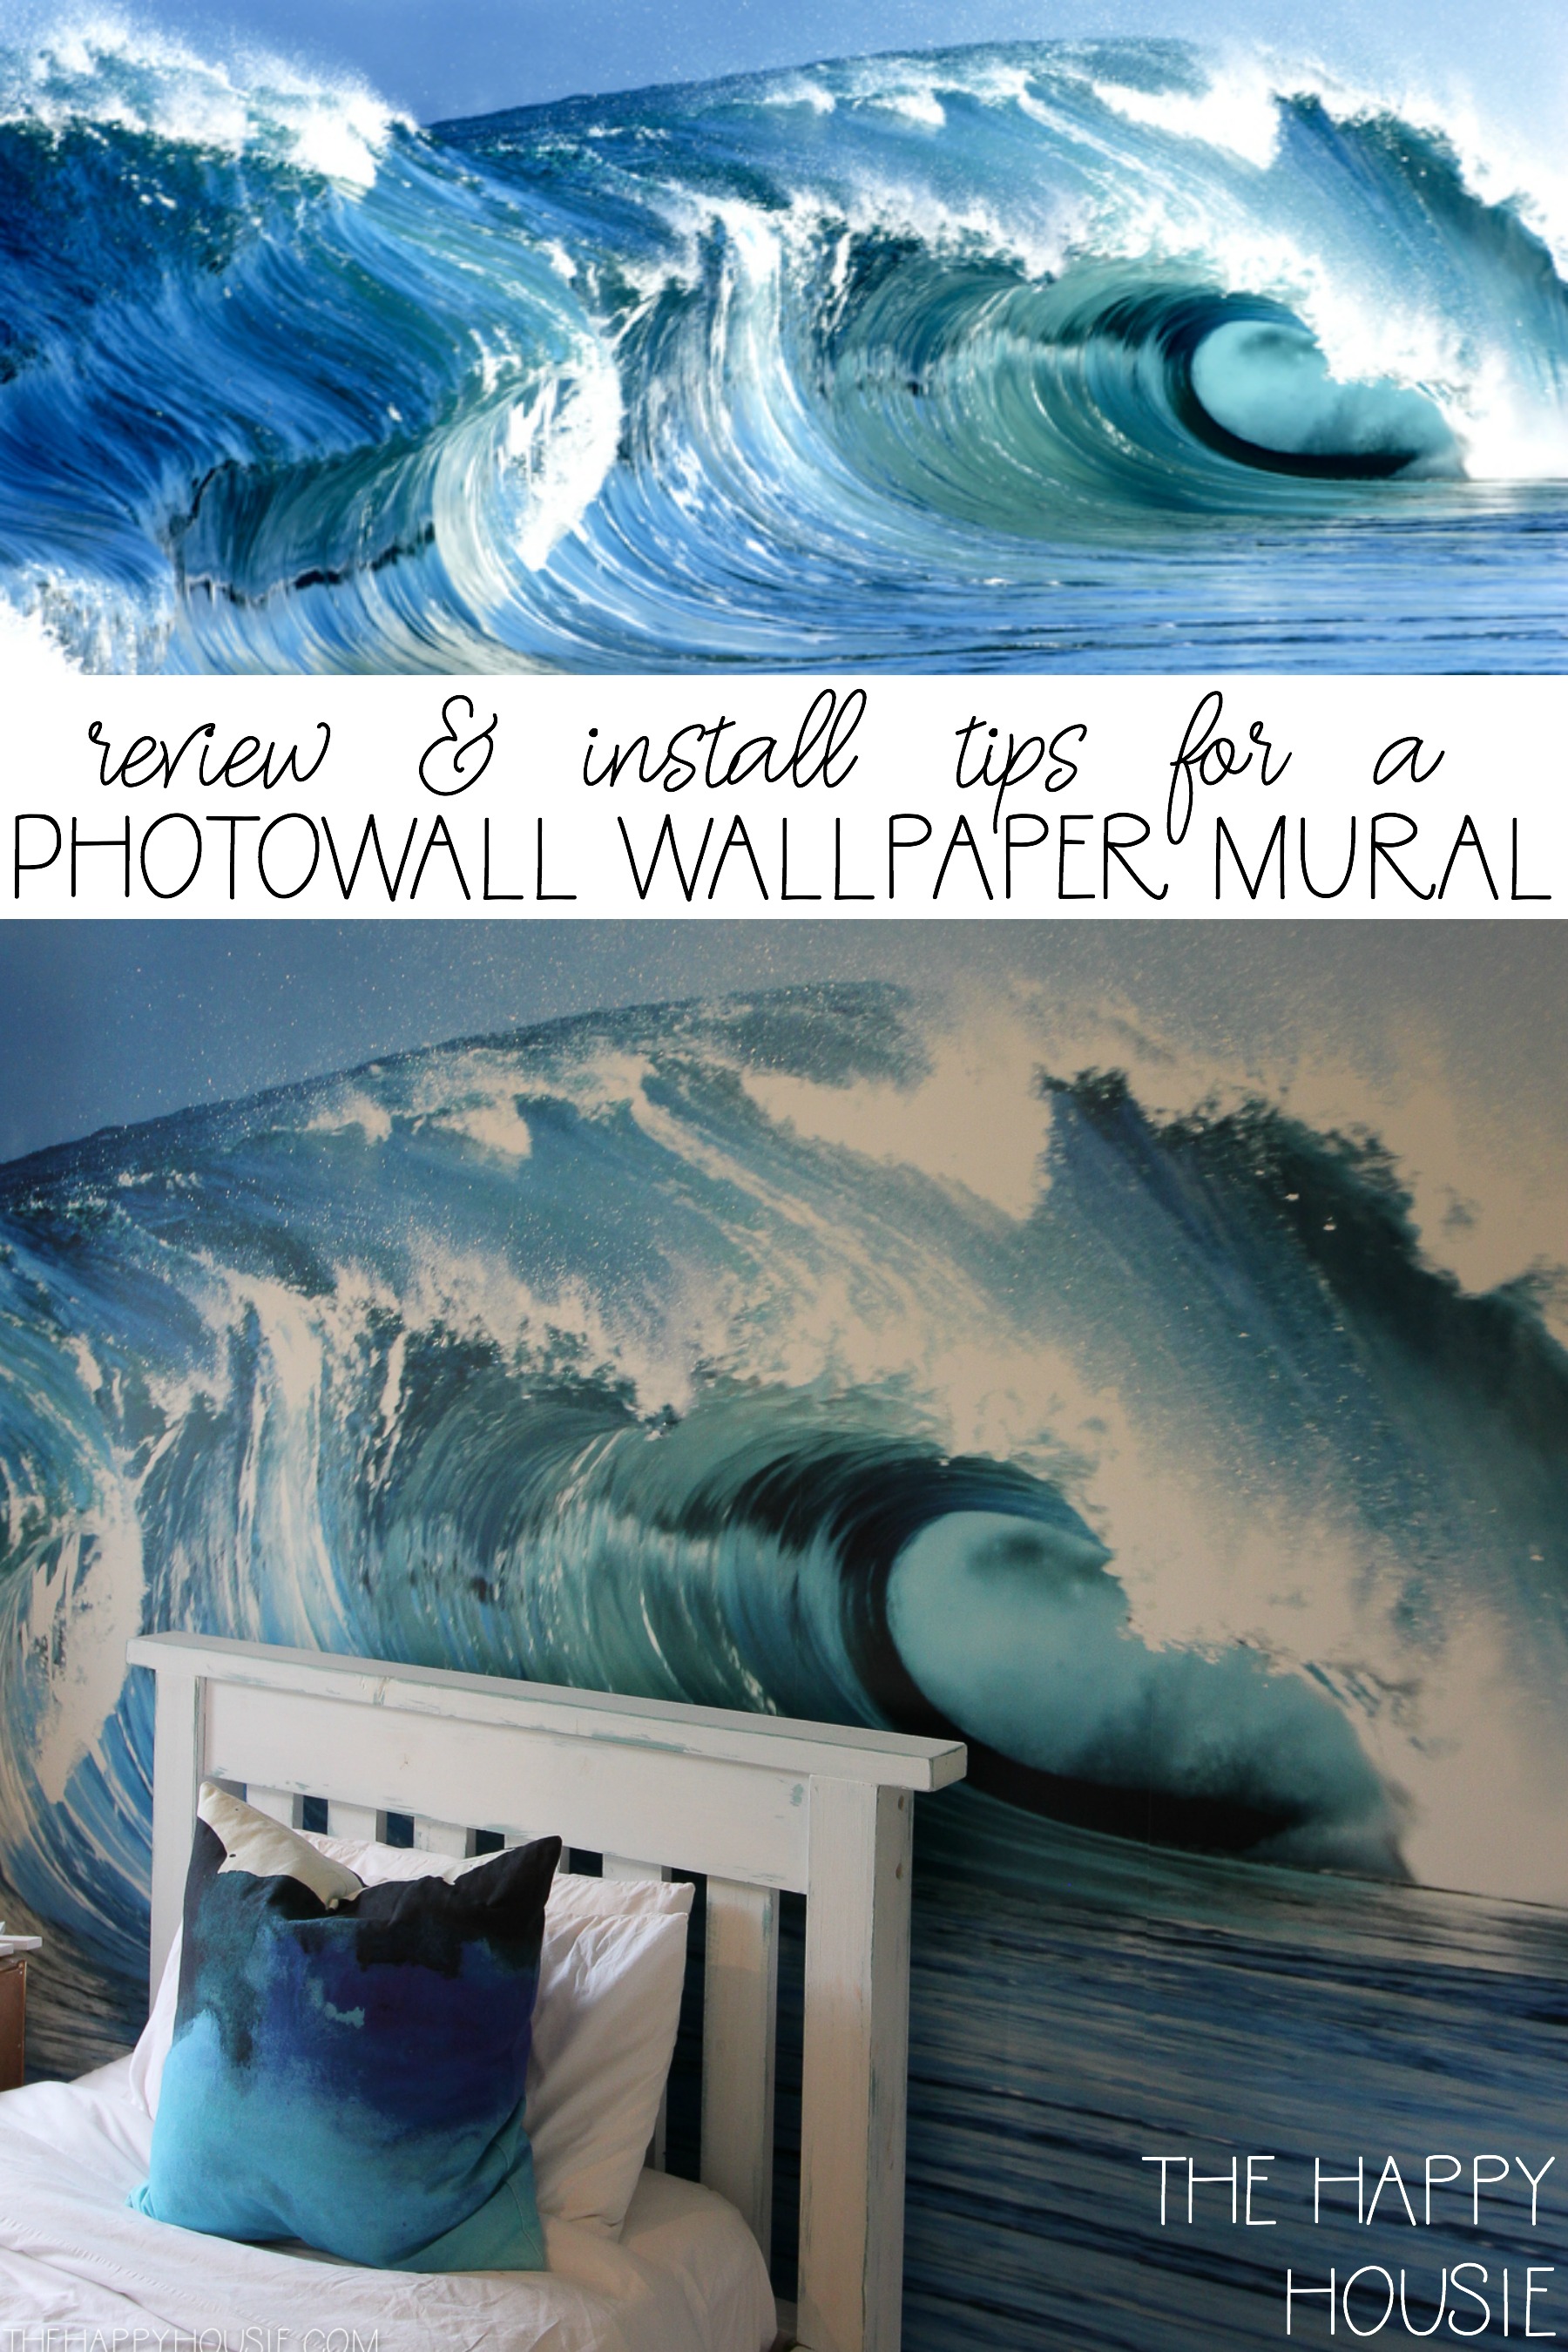 Photowall Wallpaper Mural Review | The Happy Housie